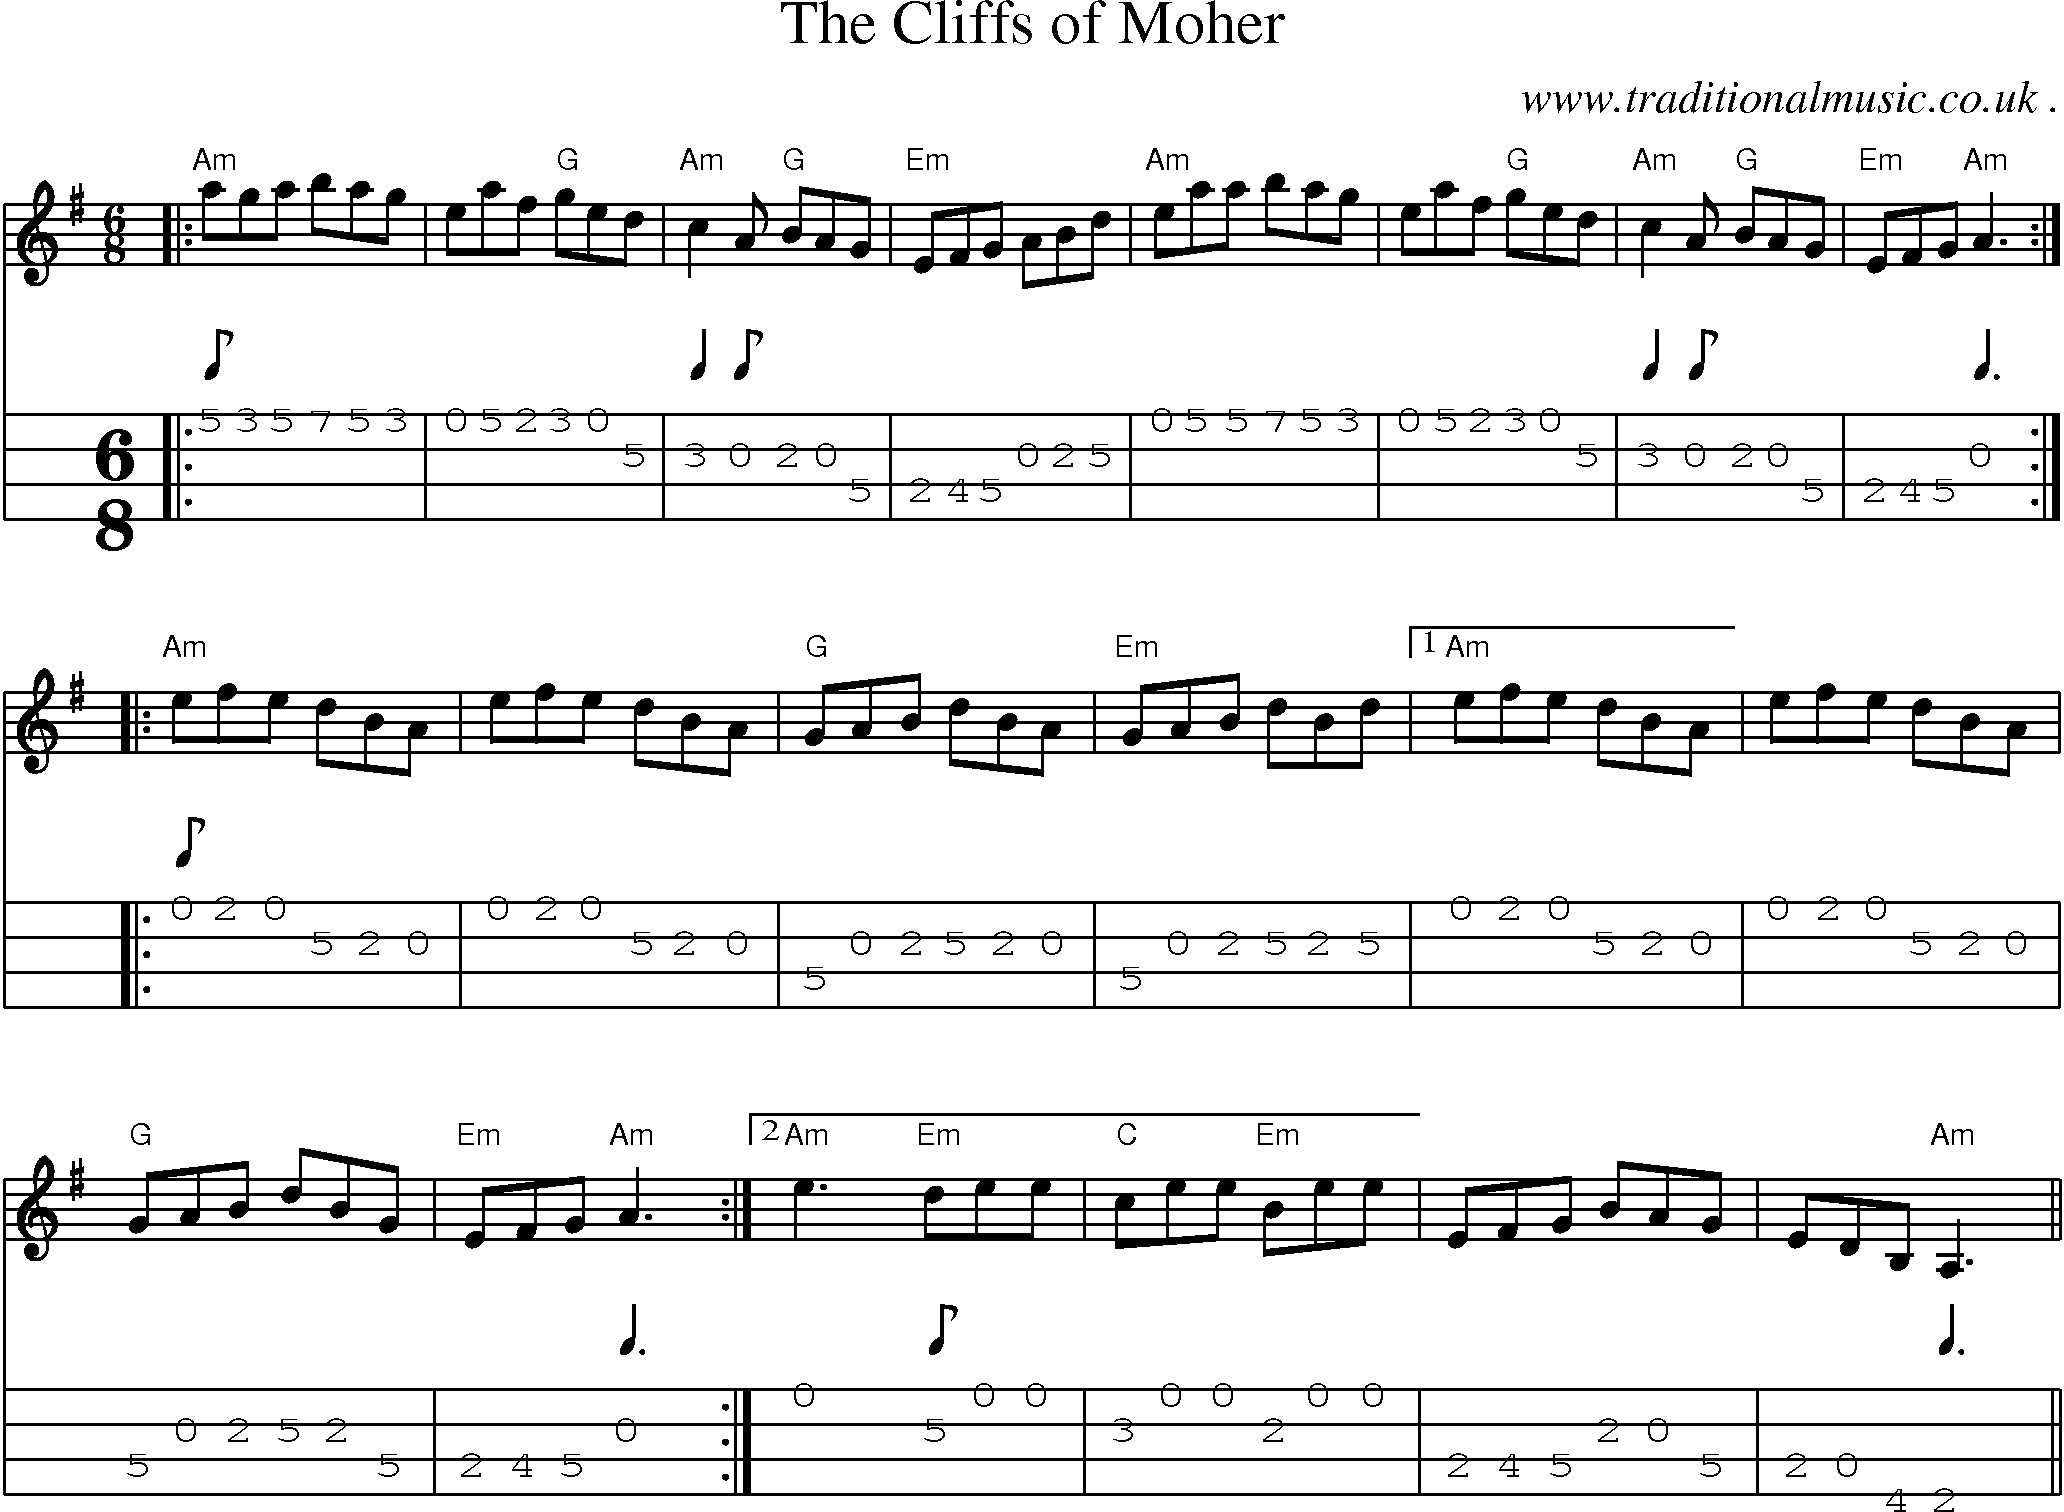 Music Score and Guitar Tabs for The Cliffs Of Moher